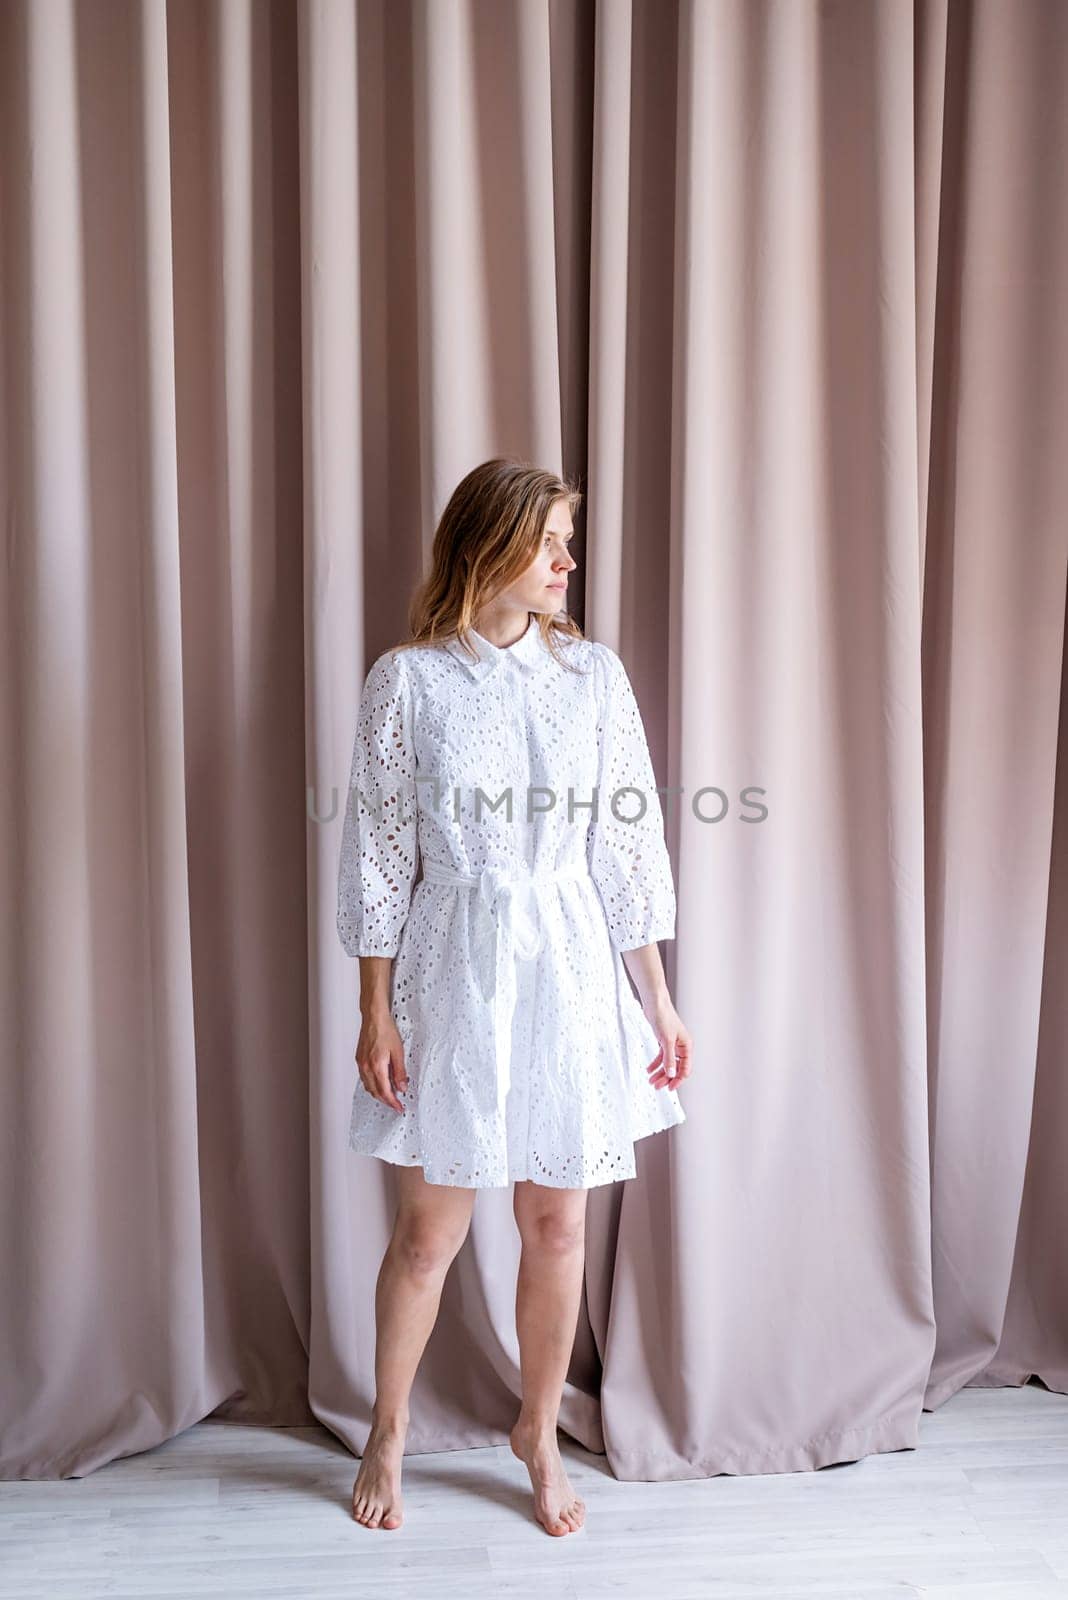 Beautiful caucasian woman in white summer fashion dress standing barefoot on beige curtain background, looking away. Pastel colors